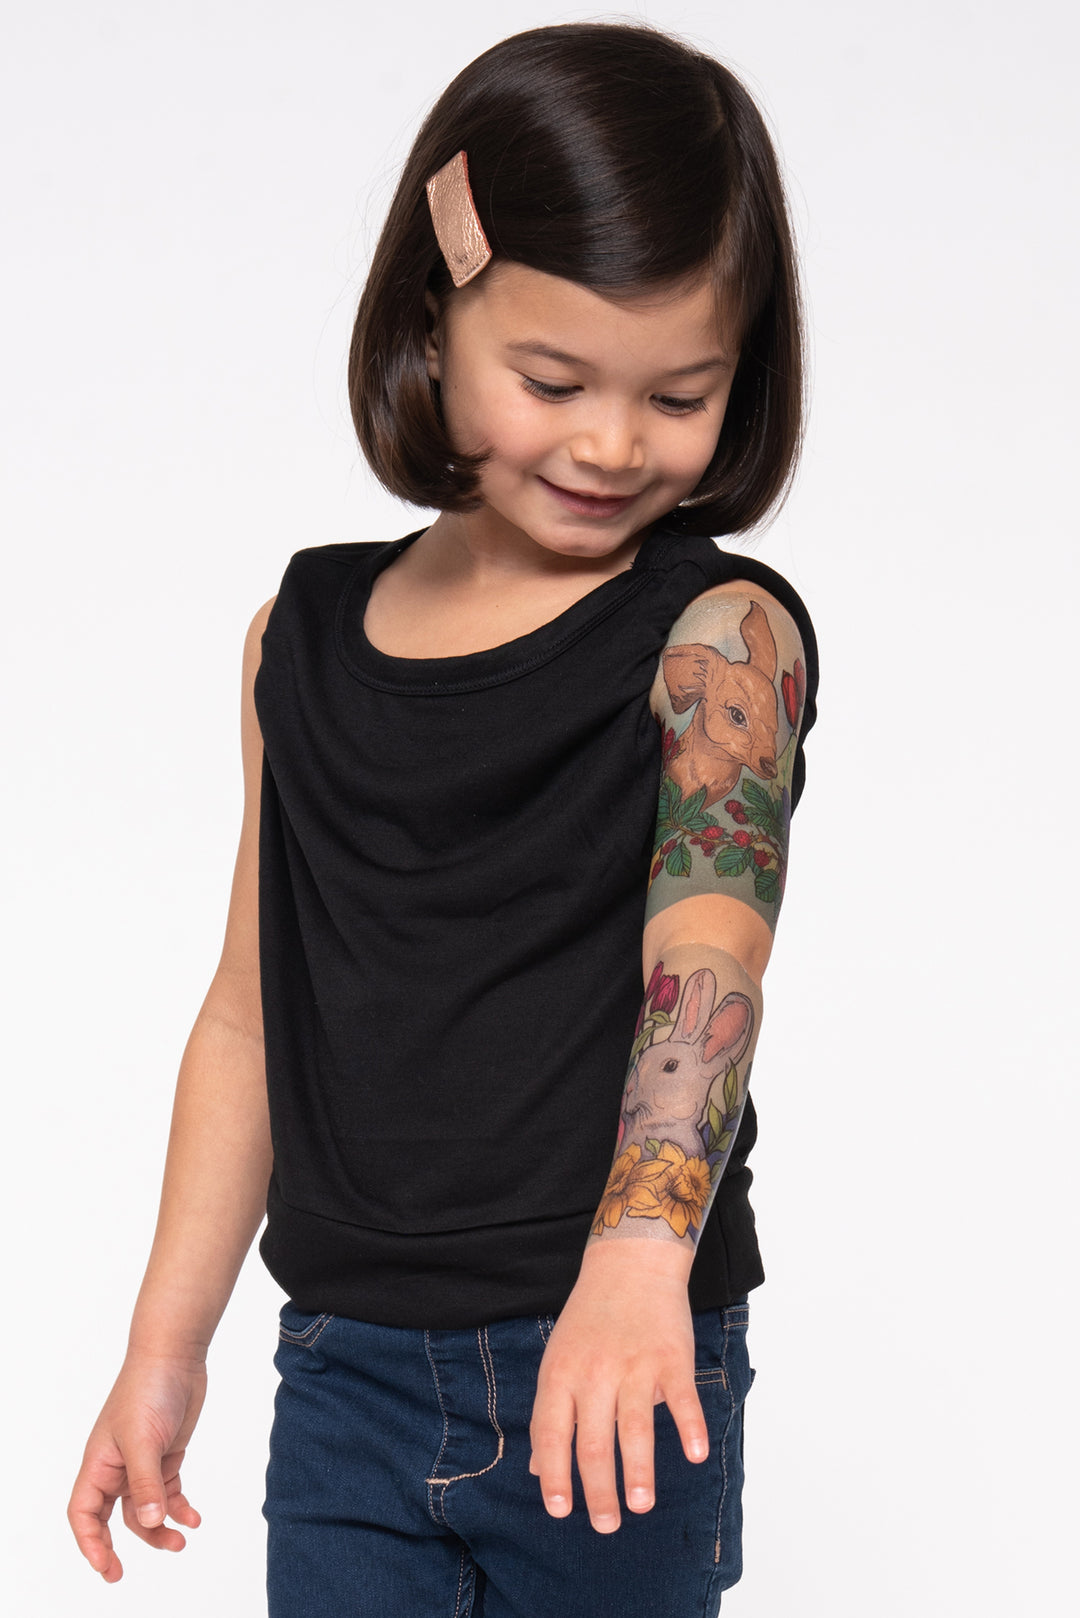 Girl shows her easter sleeve with a deer and a bunny along with lovely flowers and eggs.